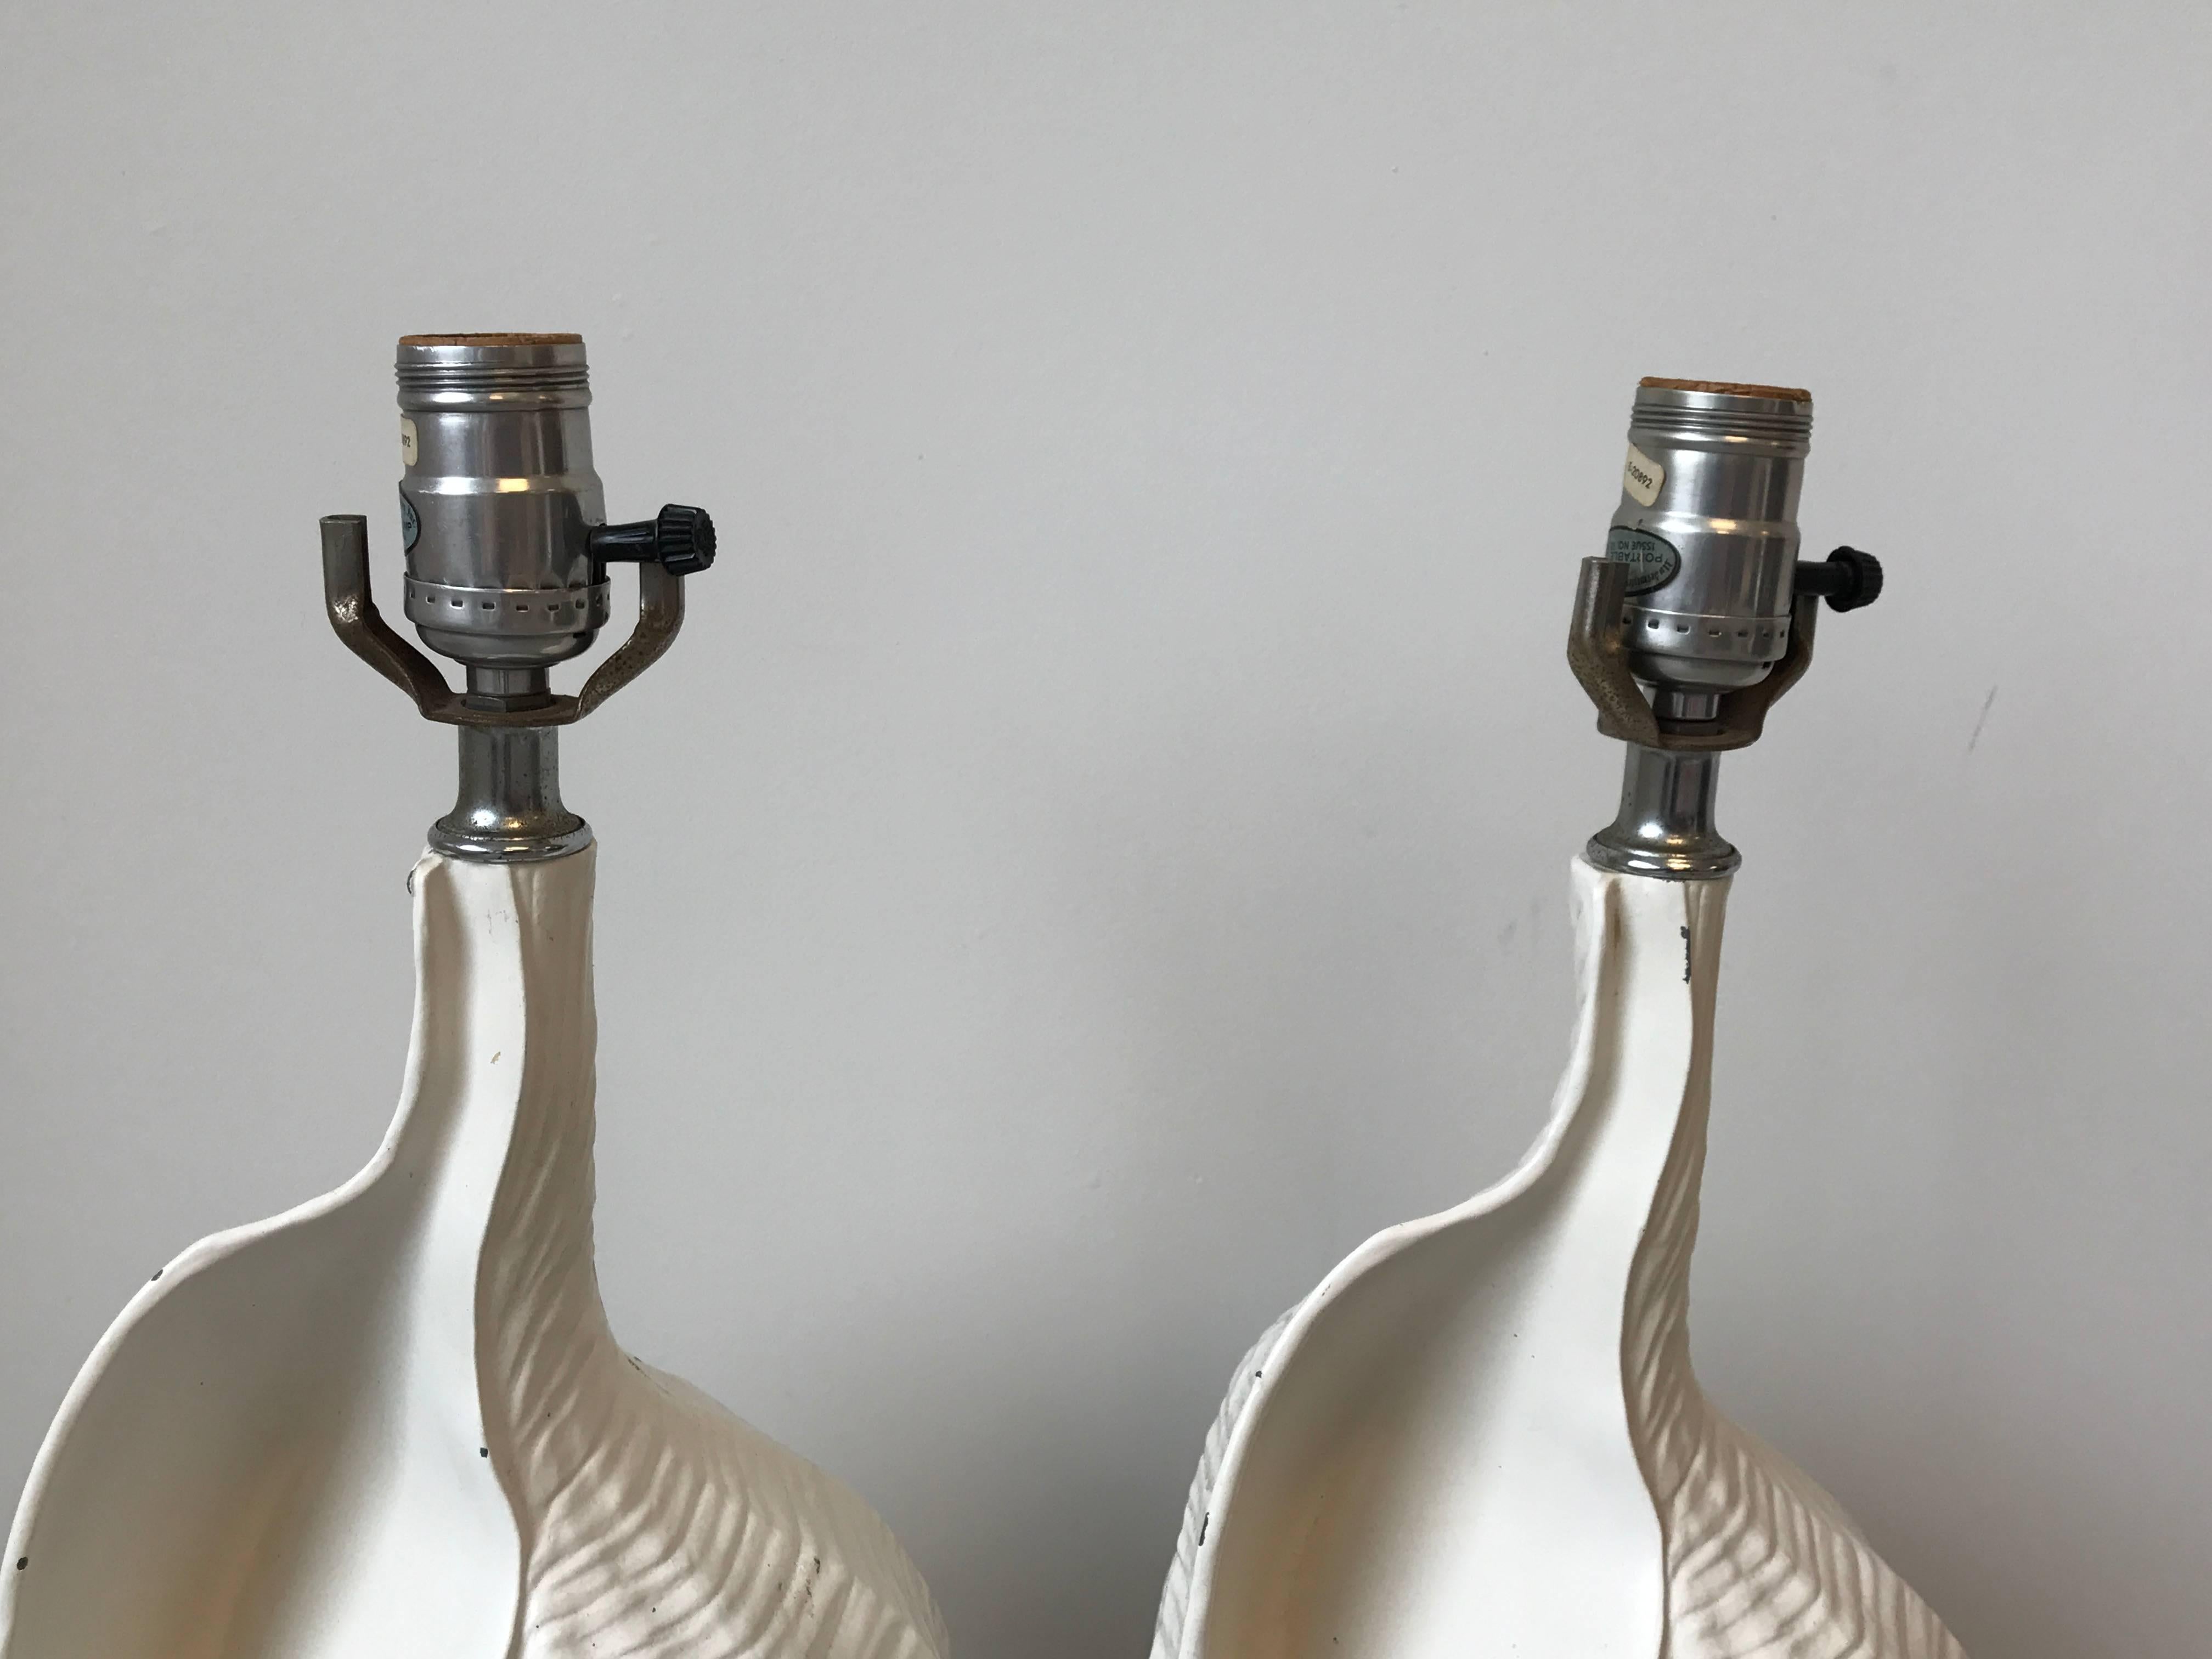 Offered is a fabulous pair of 1950s Palm Beach and Hollywood Regency style, cast-aluminum and chrome seashell lamps.